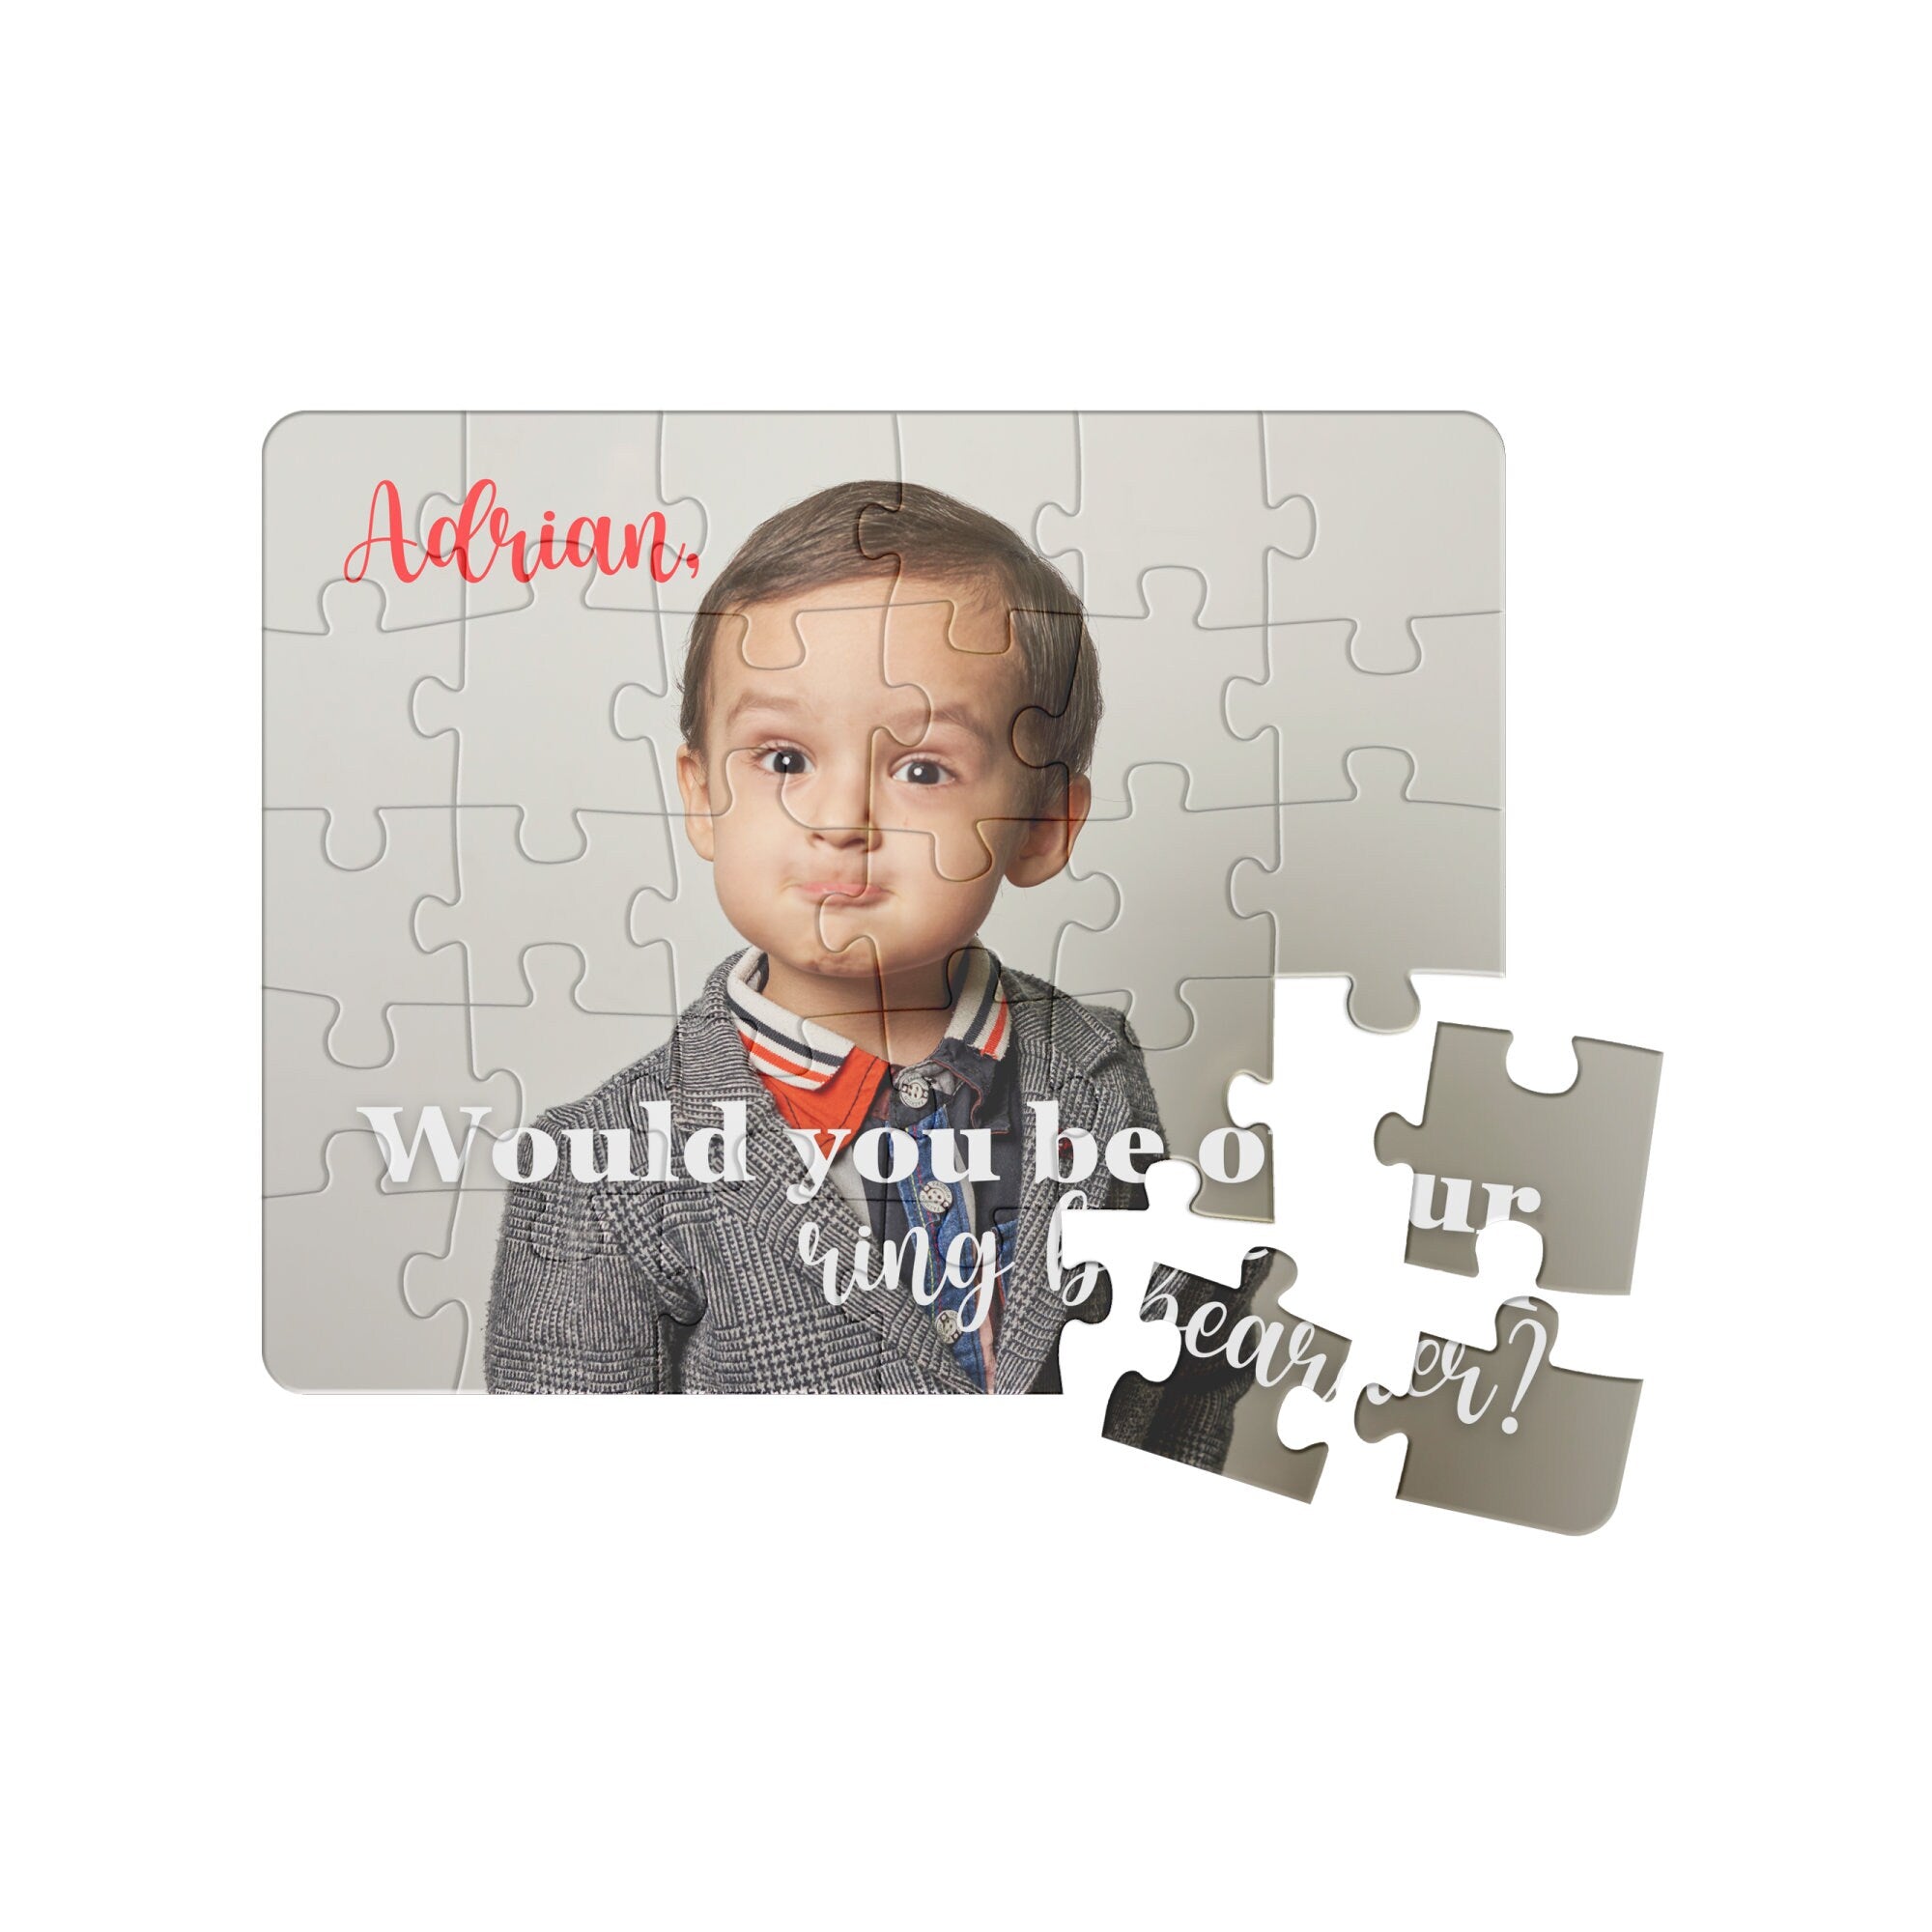 Ring Bearer Proposal Puzzle Will You Be My Ring Bearer Gift Ask Ring Bearer Puzzle Proposal